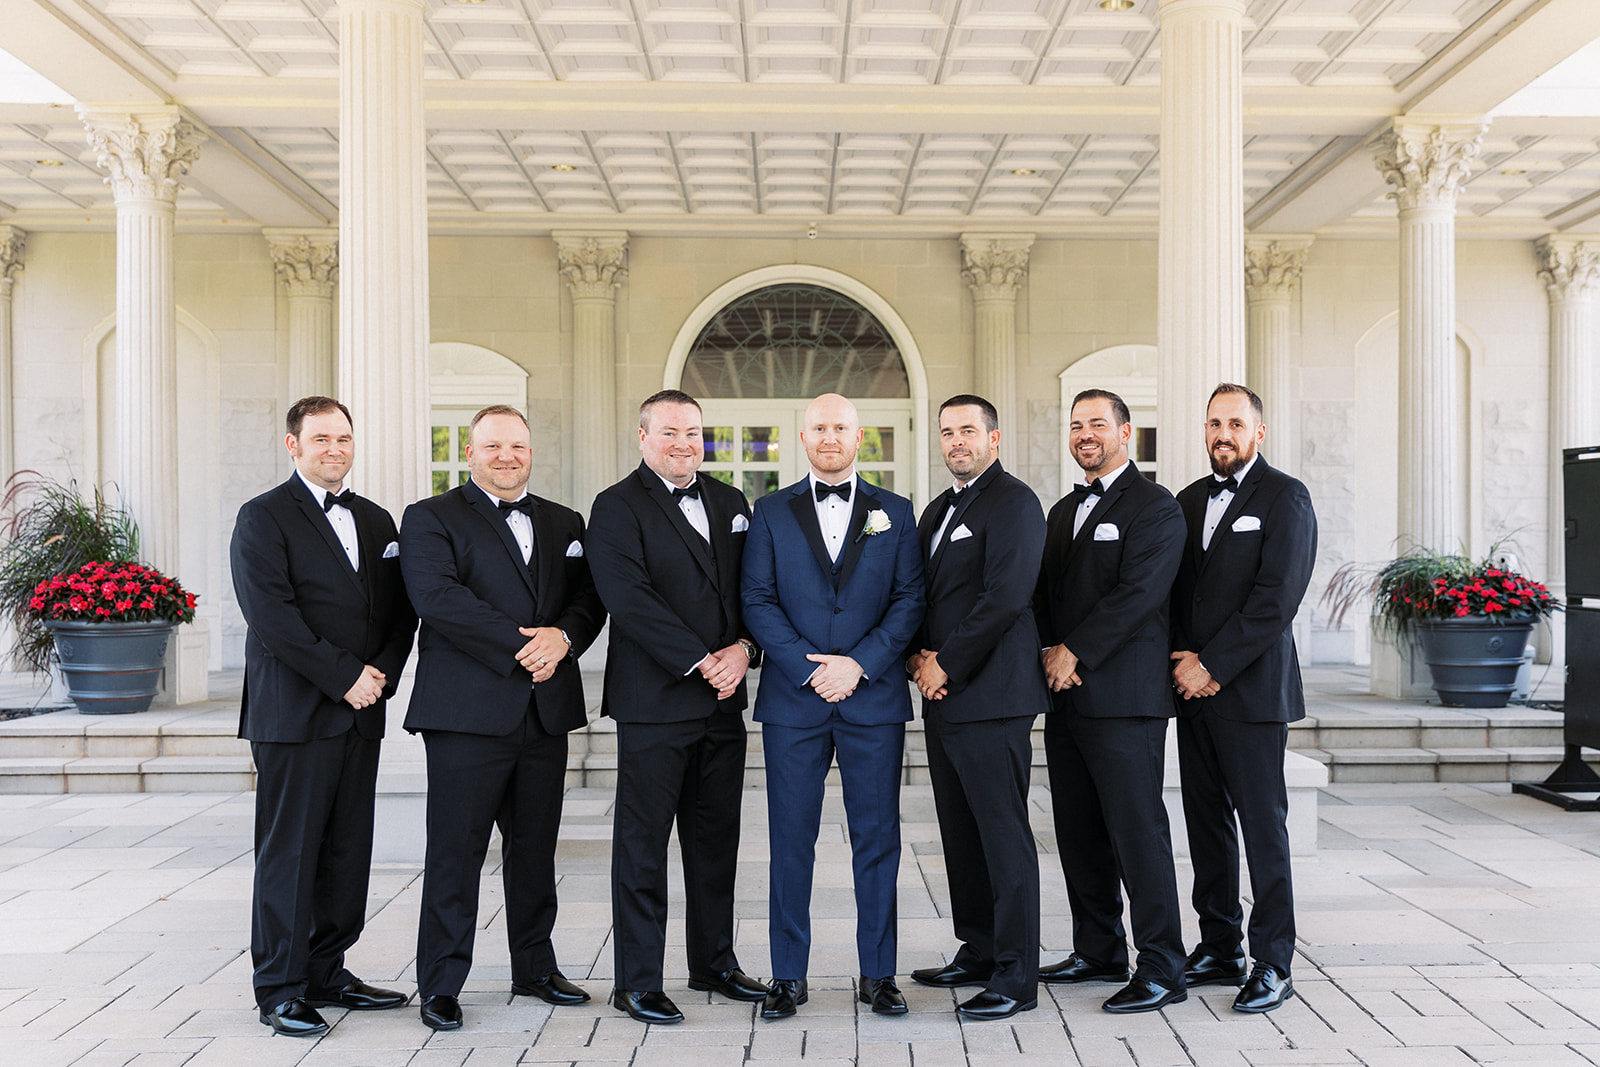 A groom stands with hands crossed in an ornate carport with his 6 groomsmen